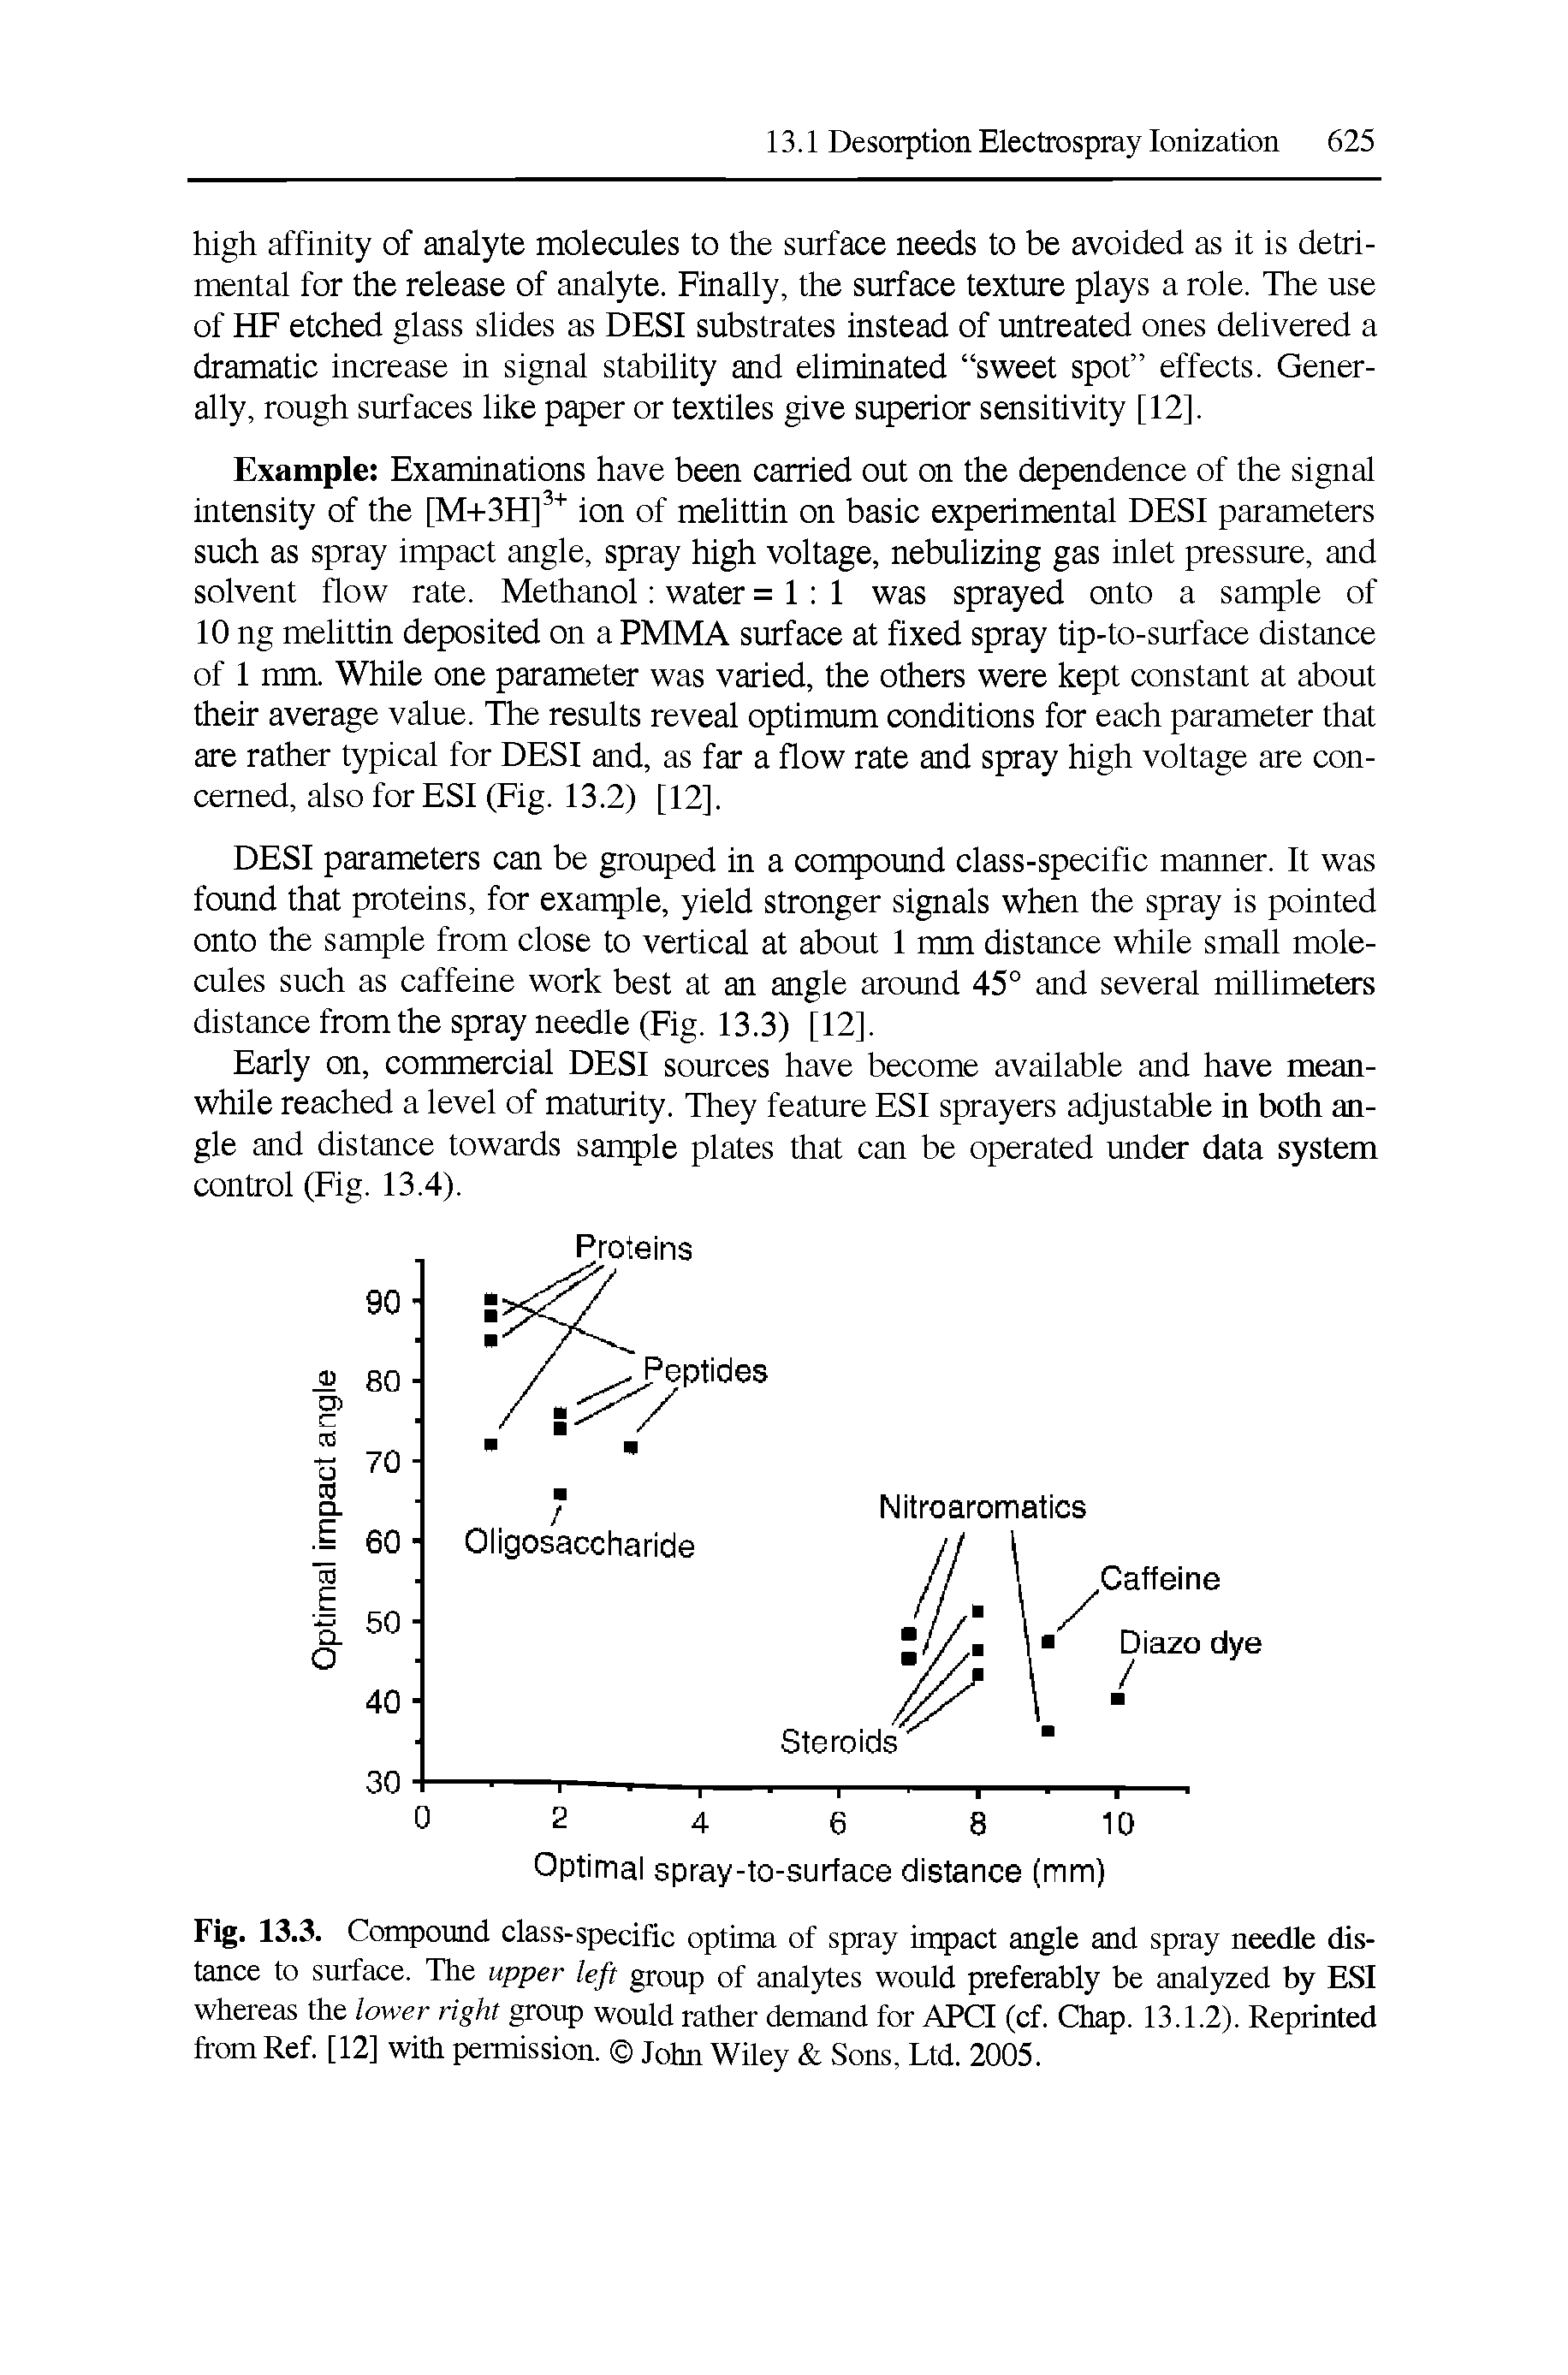 Fig. 13.3. Compound class-specific optima of spray impact angle and spray needle distance to surface. The upper left group of analytes would preferably be analyzed by ESI whereas the lower right group would rather demand for APCI (cf. Chap. 13.1.2). Reprinted from Ref. [12] with permission. John Wiley Sons, Ltd. 2005.